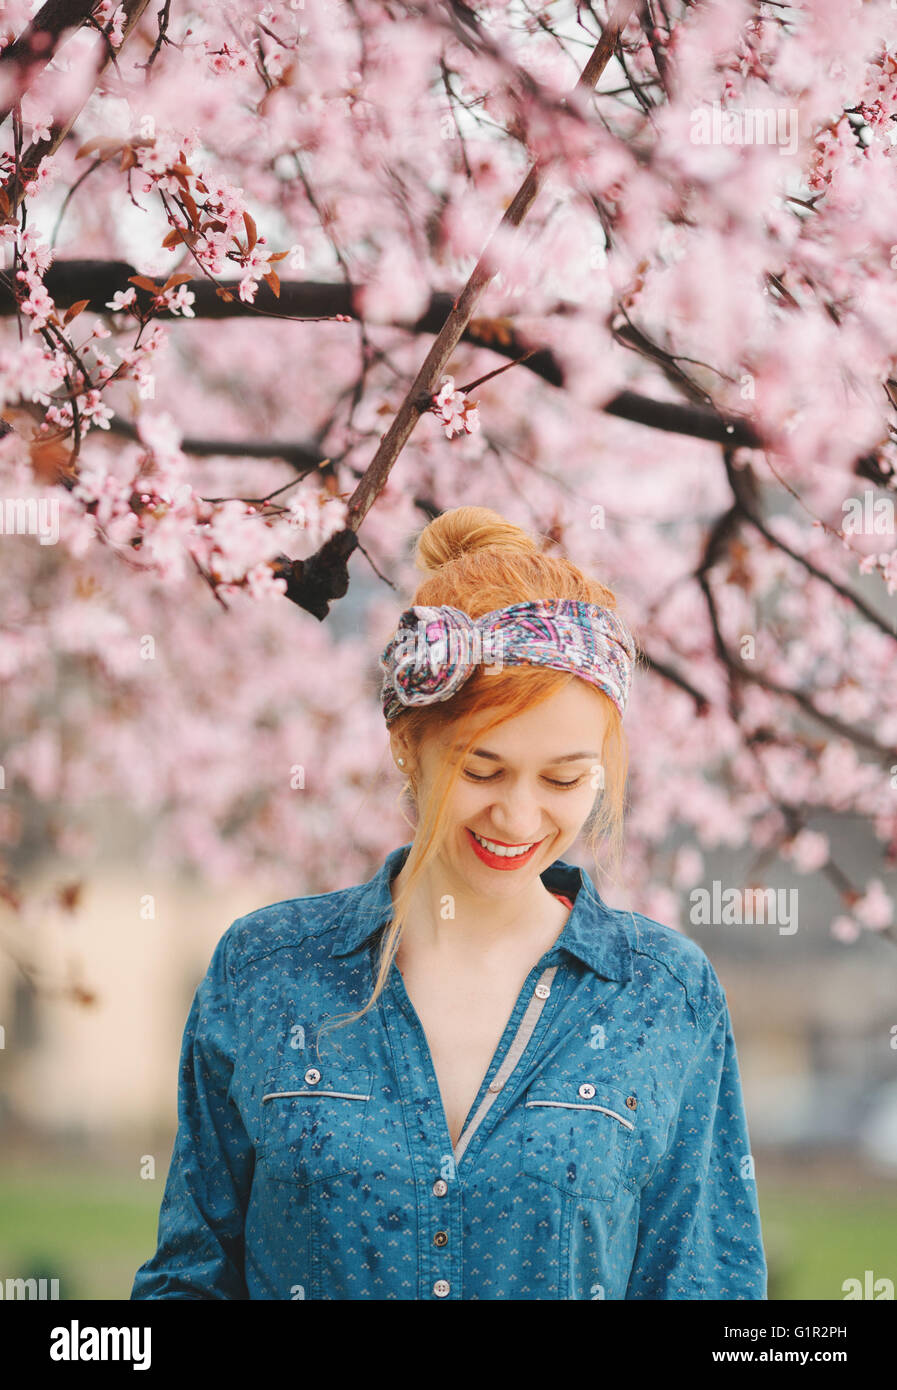 Portrait of a young woman smiling in front of a spring blossom tree Stock Photo